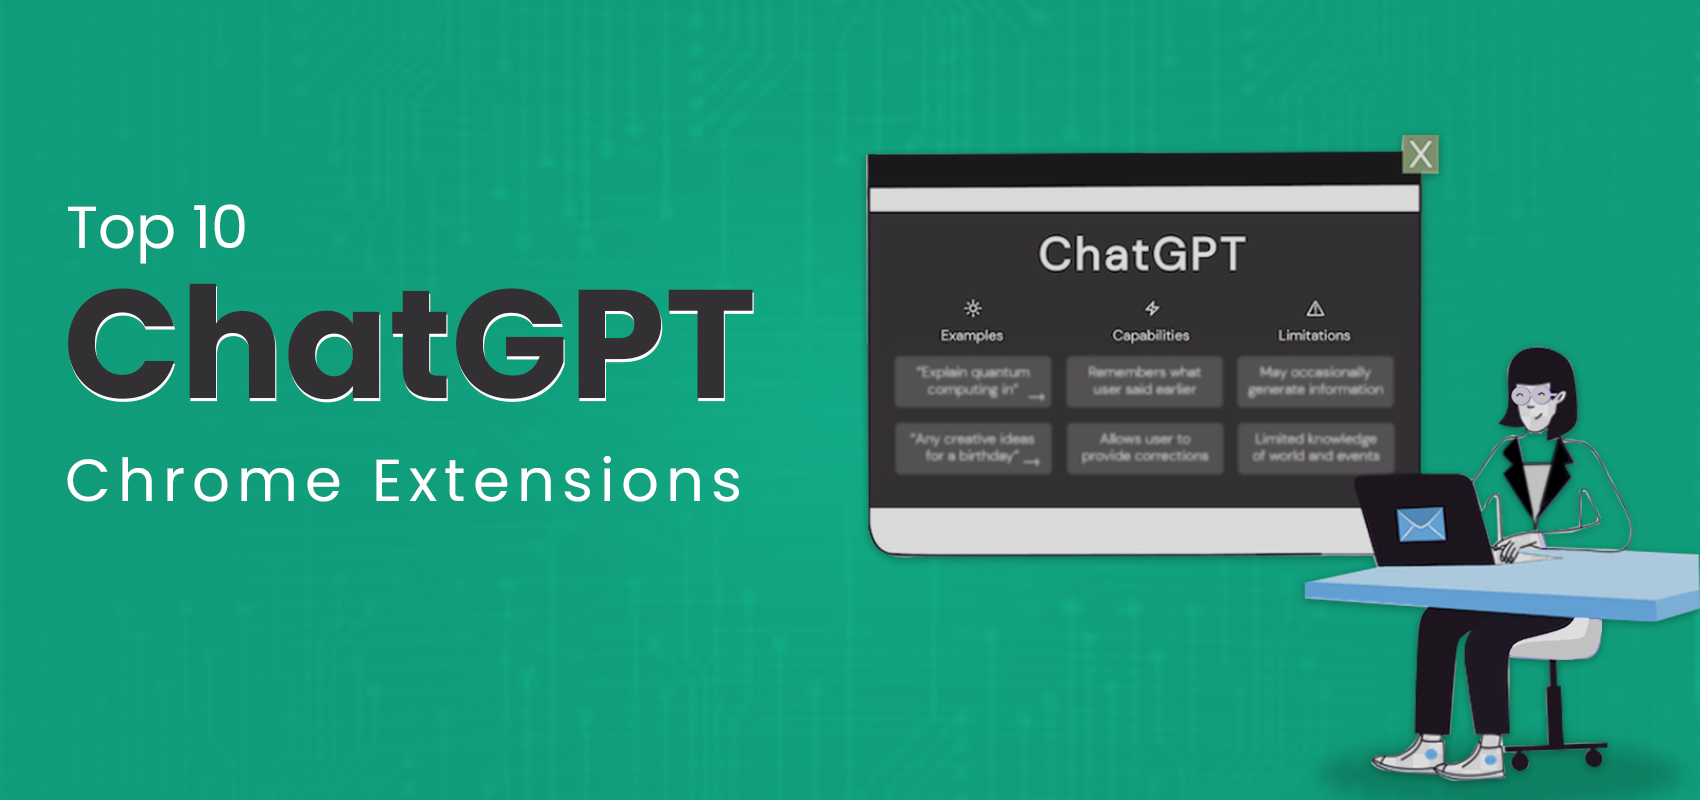 Top 10 ChatGPT Chrome Extensions